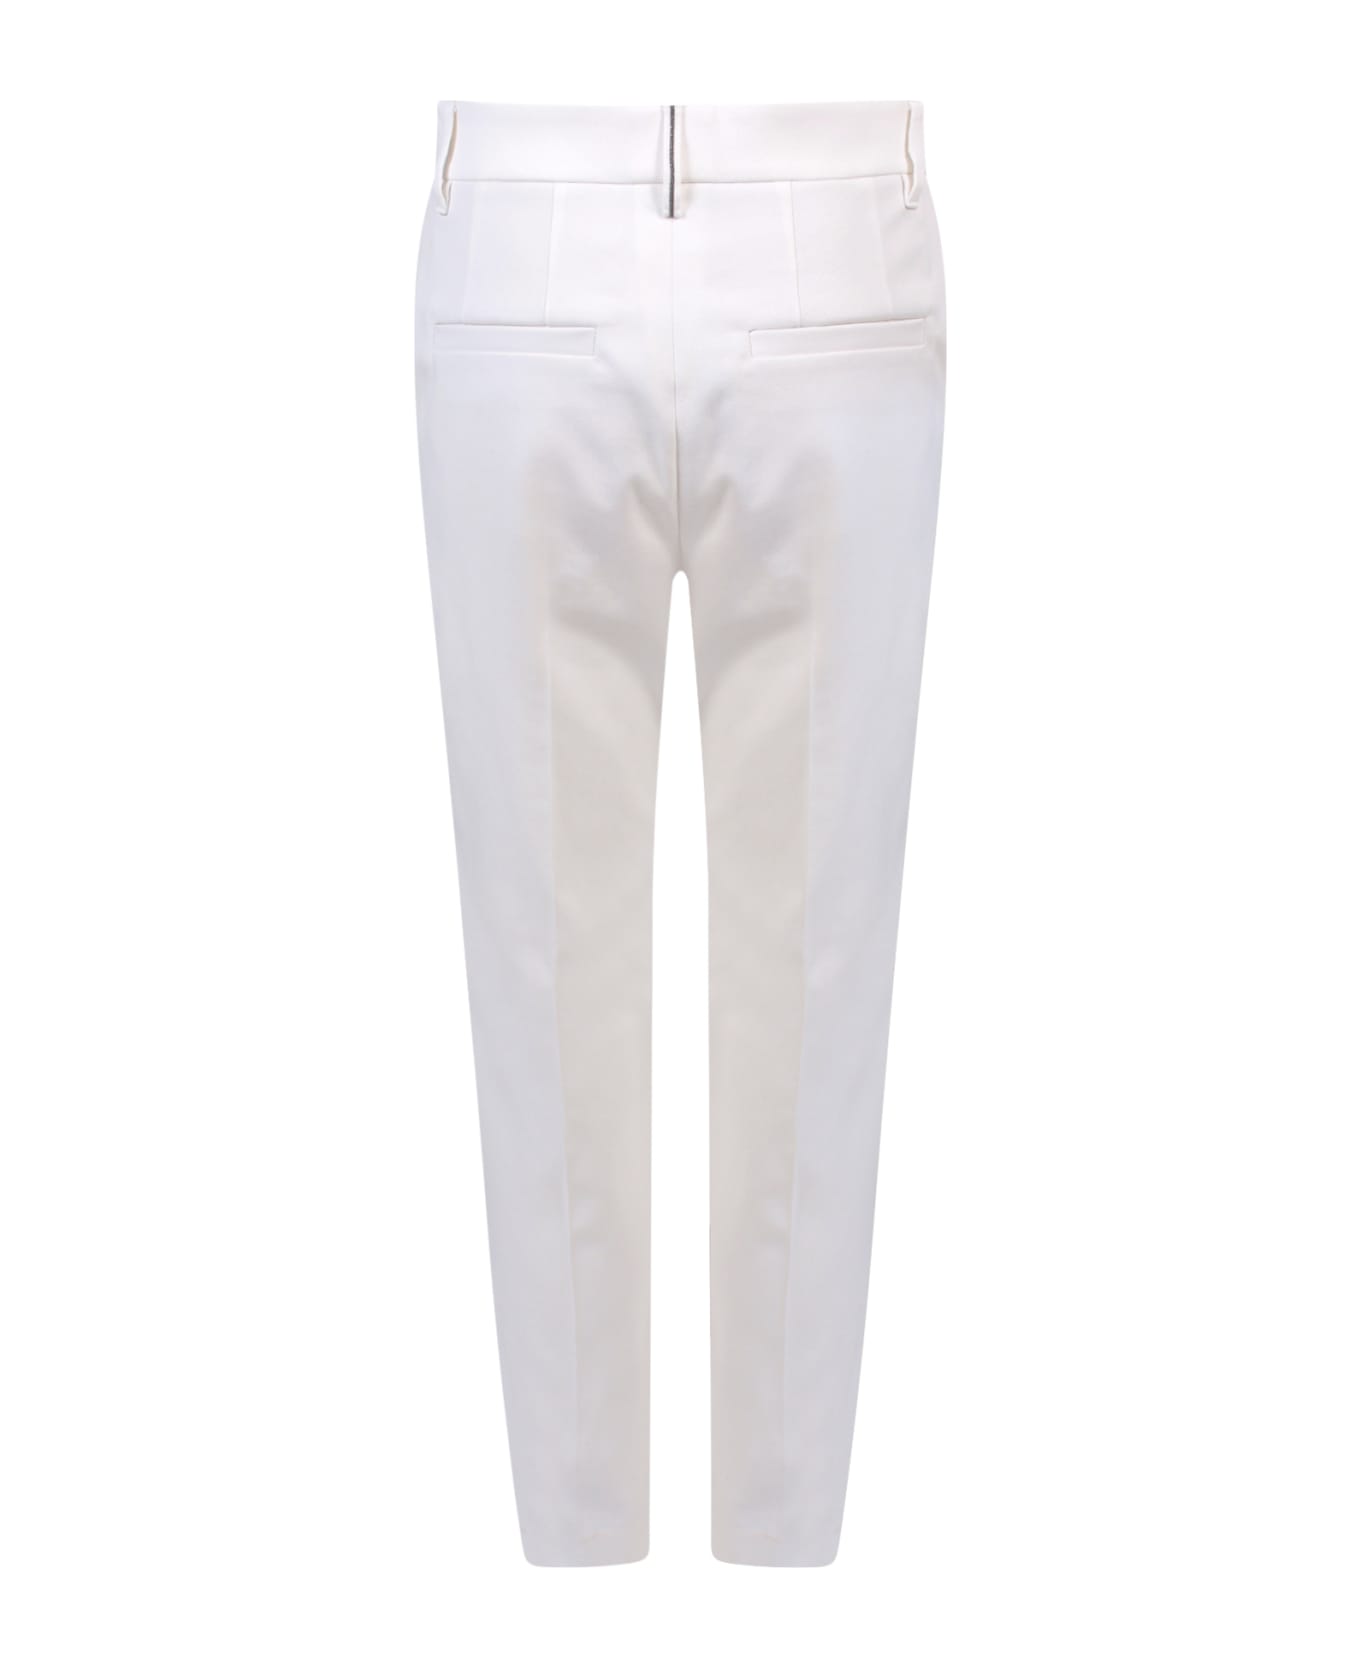 Brunello Cucinelli Stretch Cotton Drill Trousers With Jewel On The Back Loop - cream ボトムス